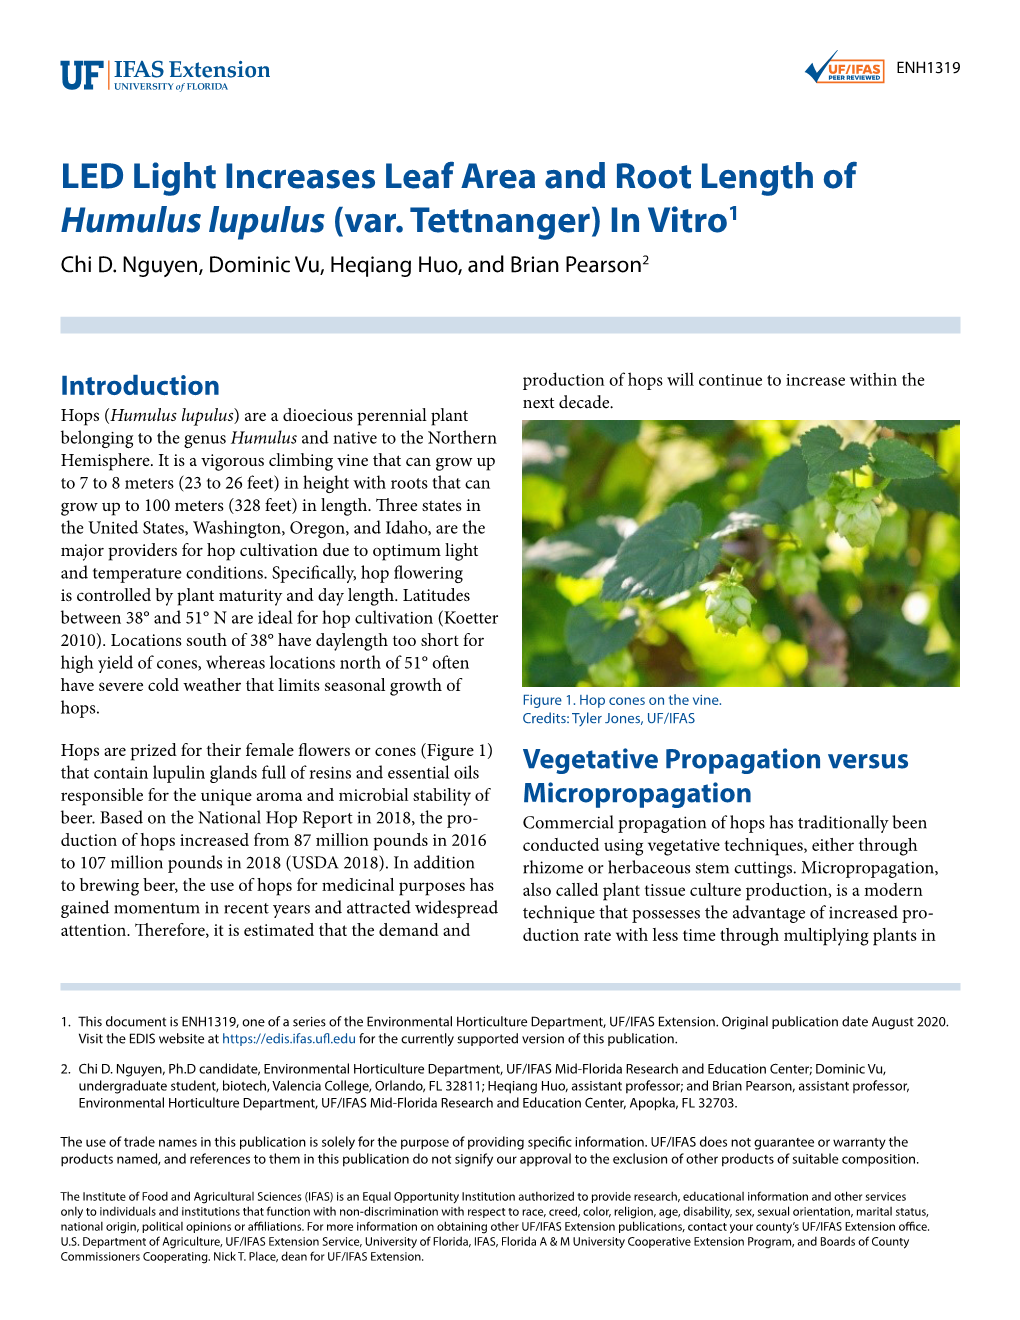 LED Light Increases Leaf Area and Root Length of Humulus Lupulus (Var. Tettnanger) in Vitro1 Chi D